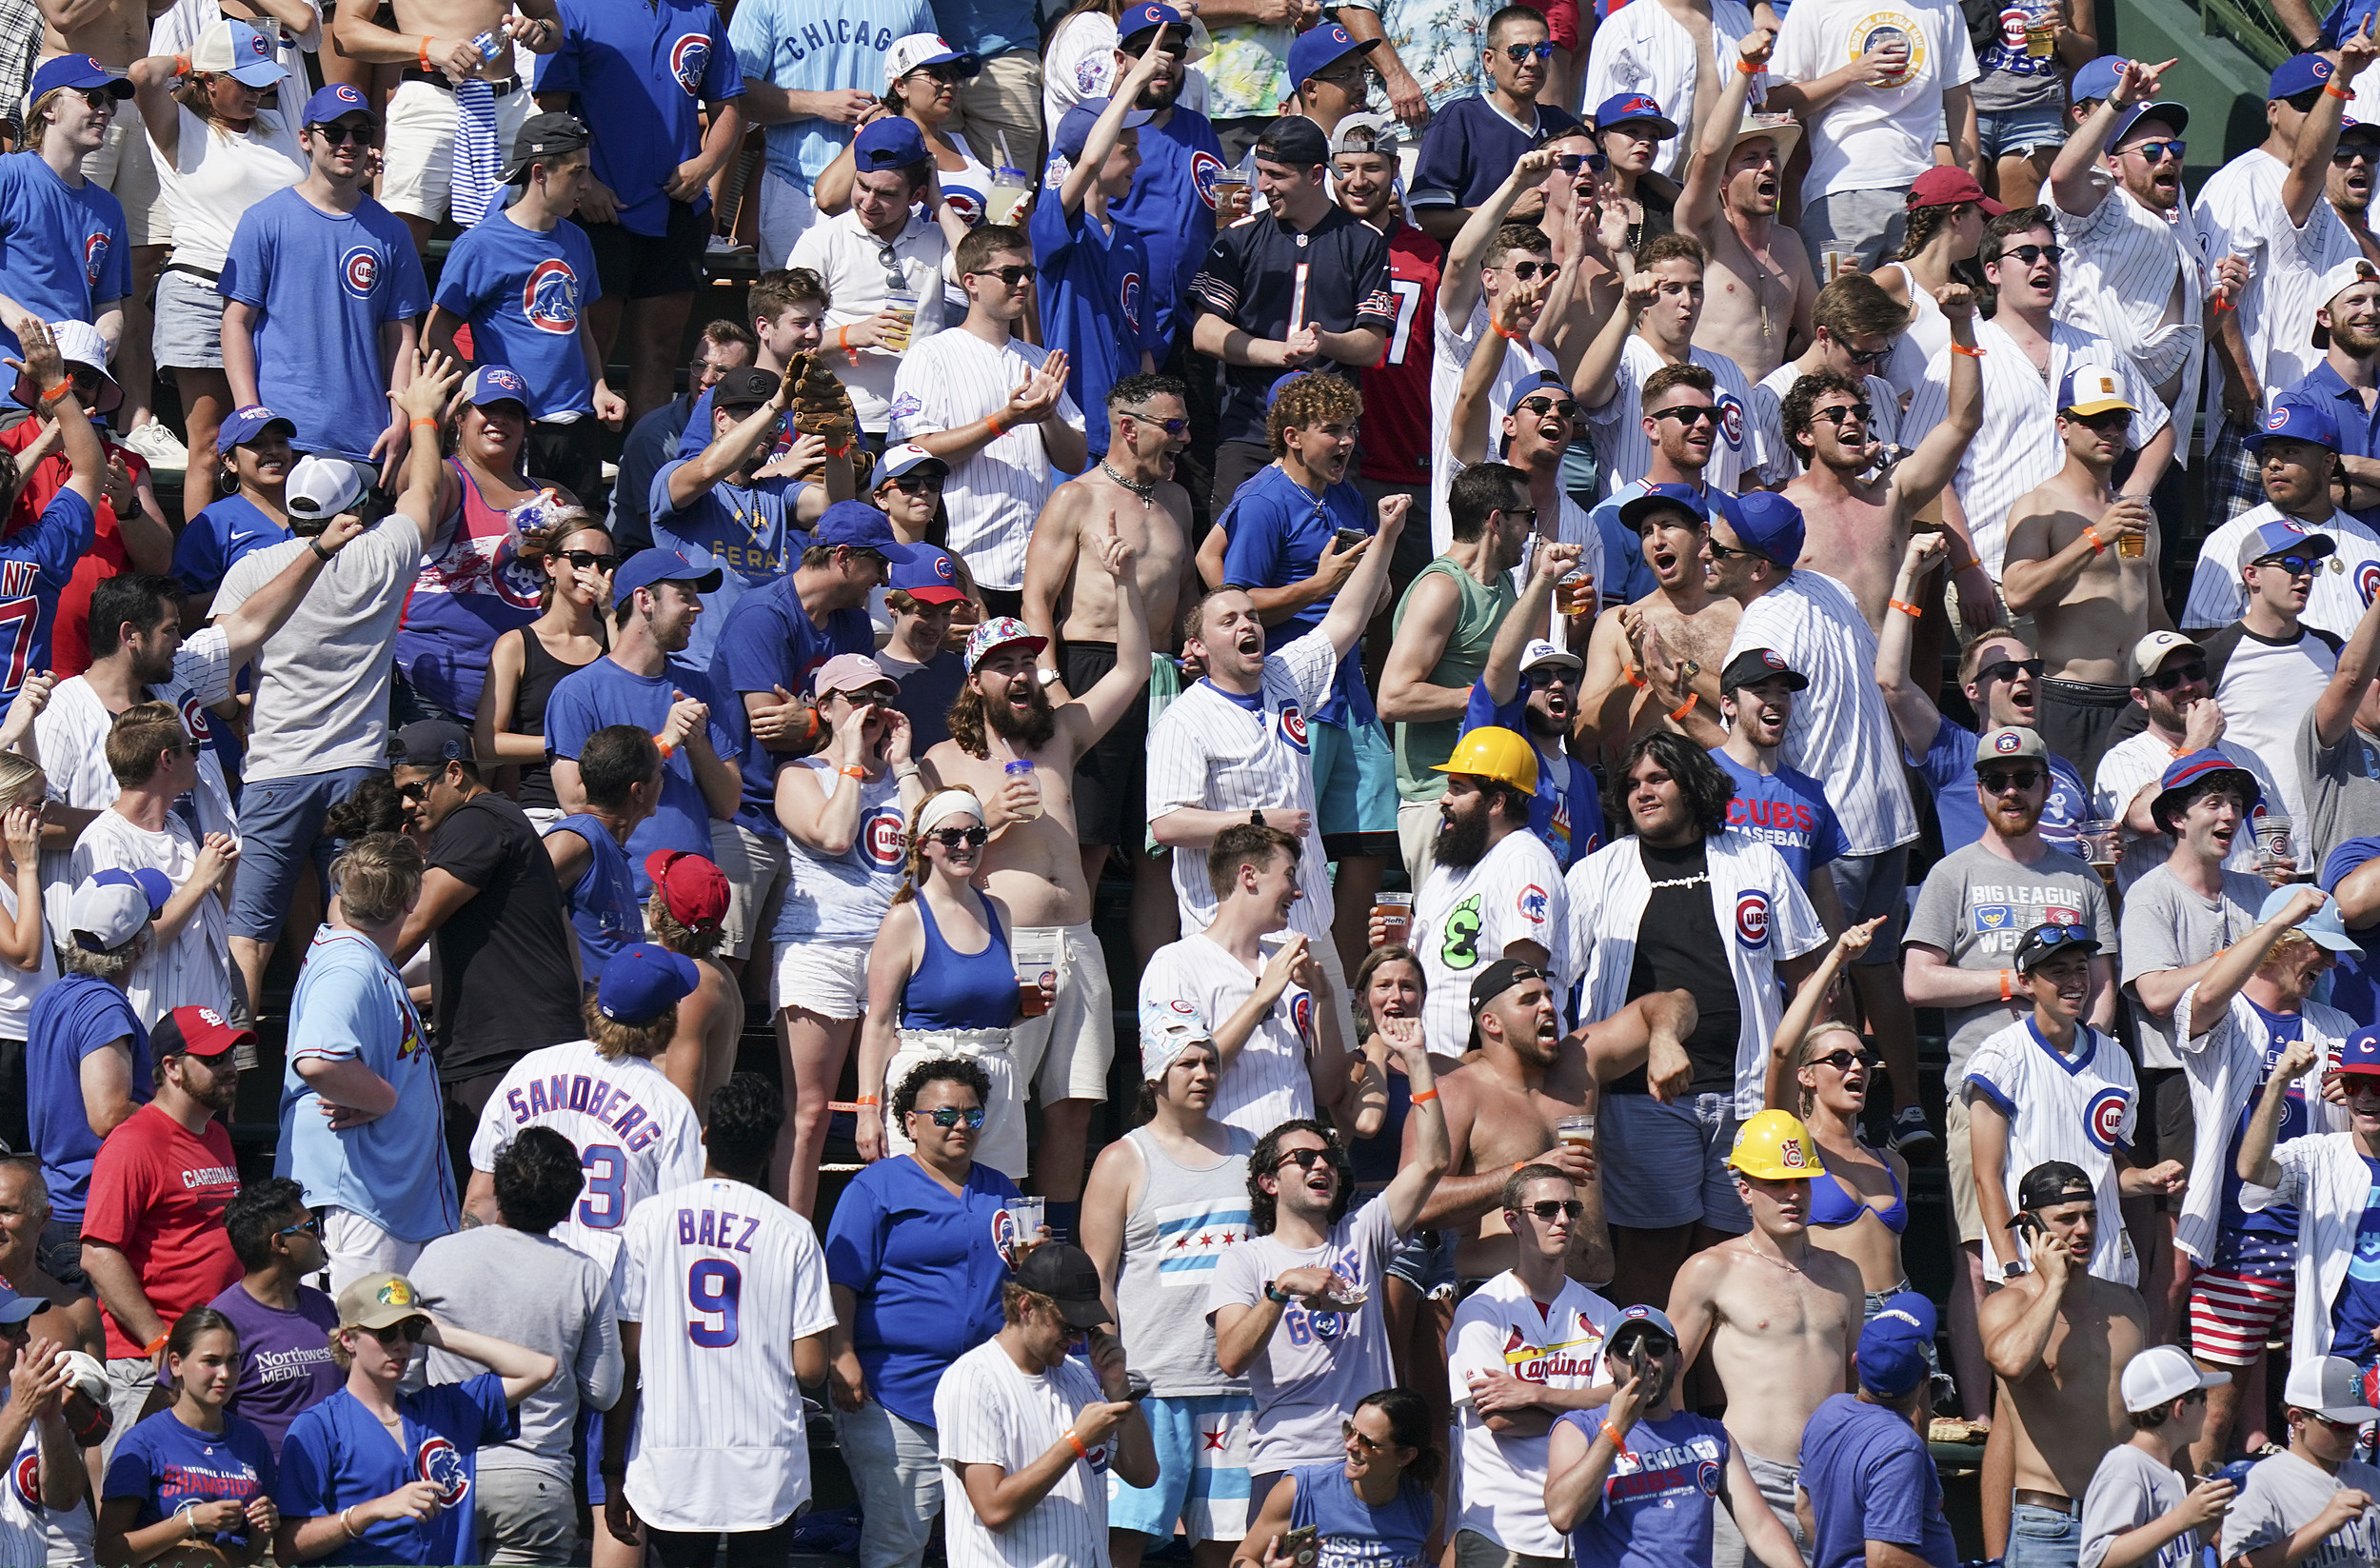 Wrigley Field hates cup snakes but welcomes beer bats with open arms